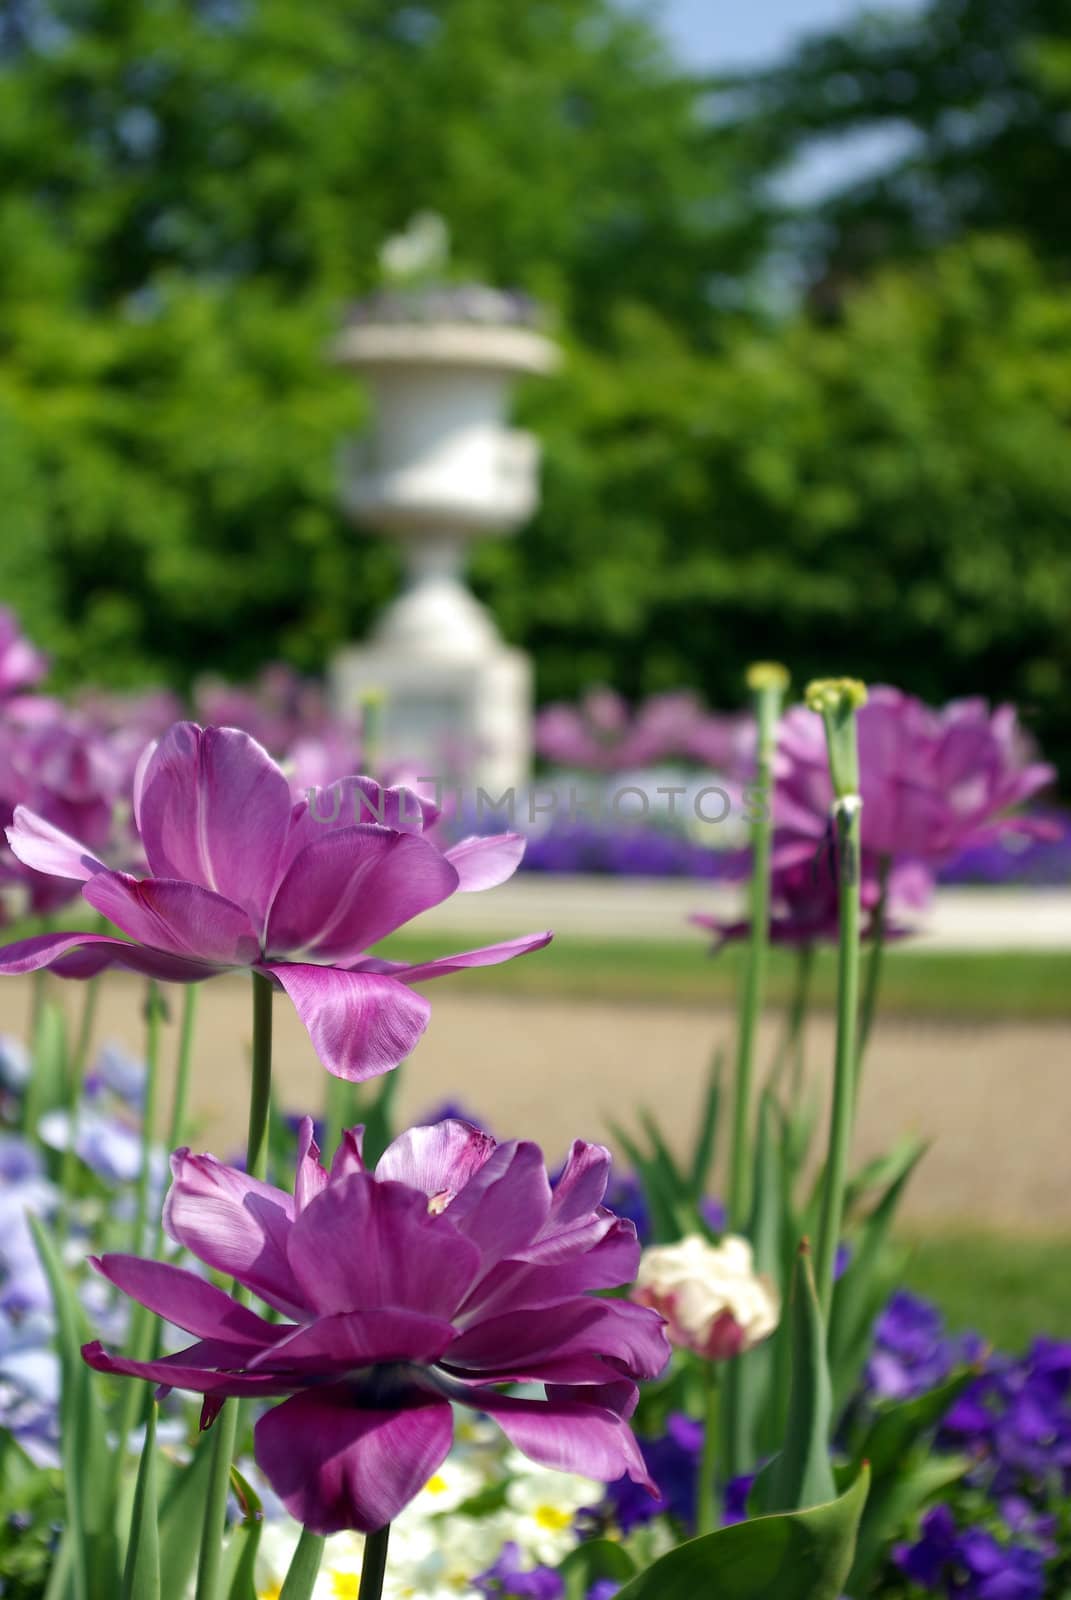 Flowers and fountain in a park by trombax